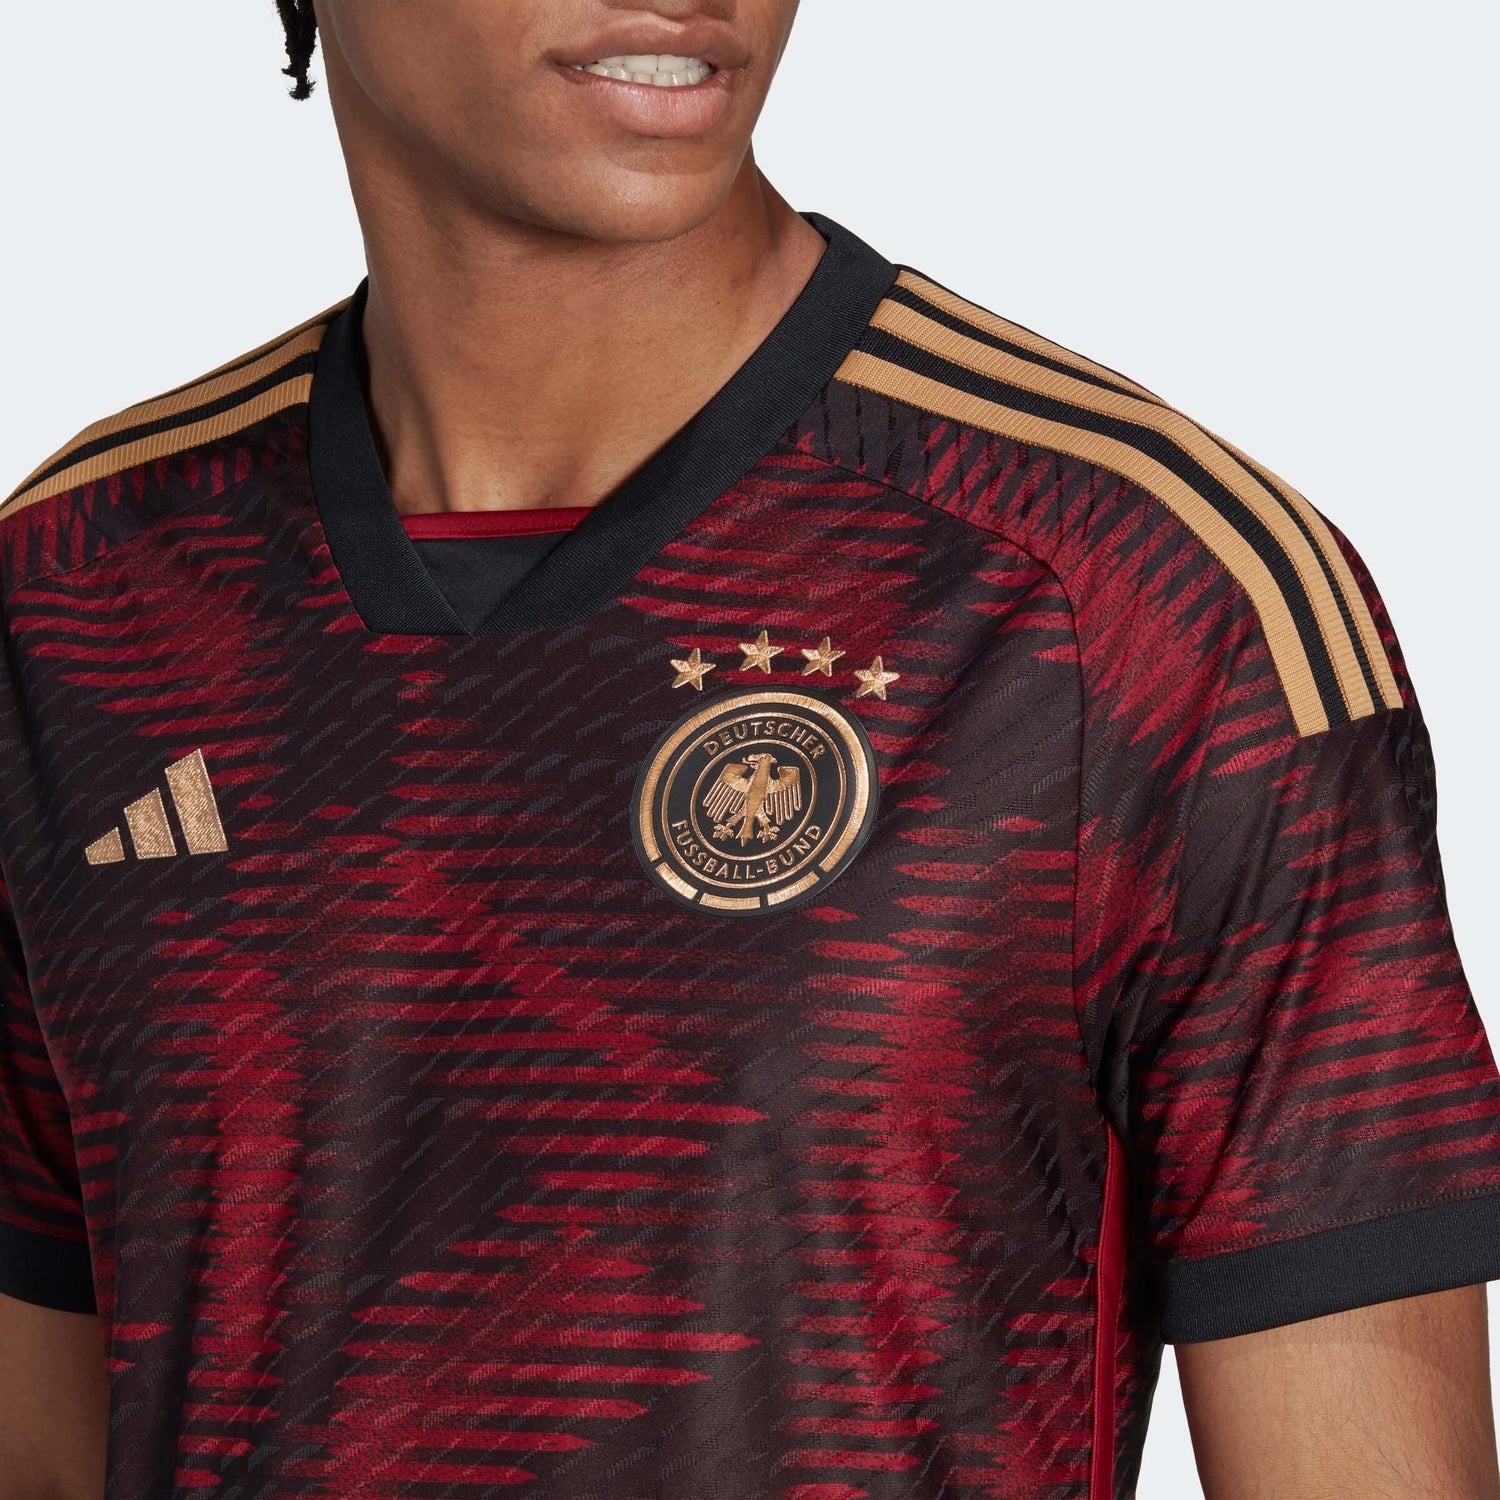 2022 adidas Germany Away Authentic Jersey - Soccer Master